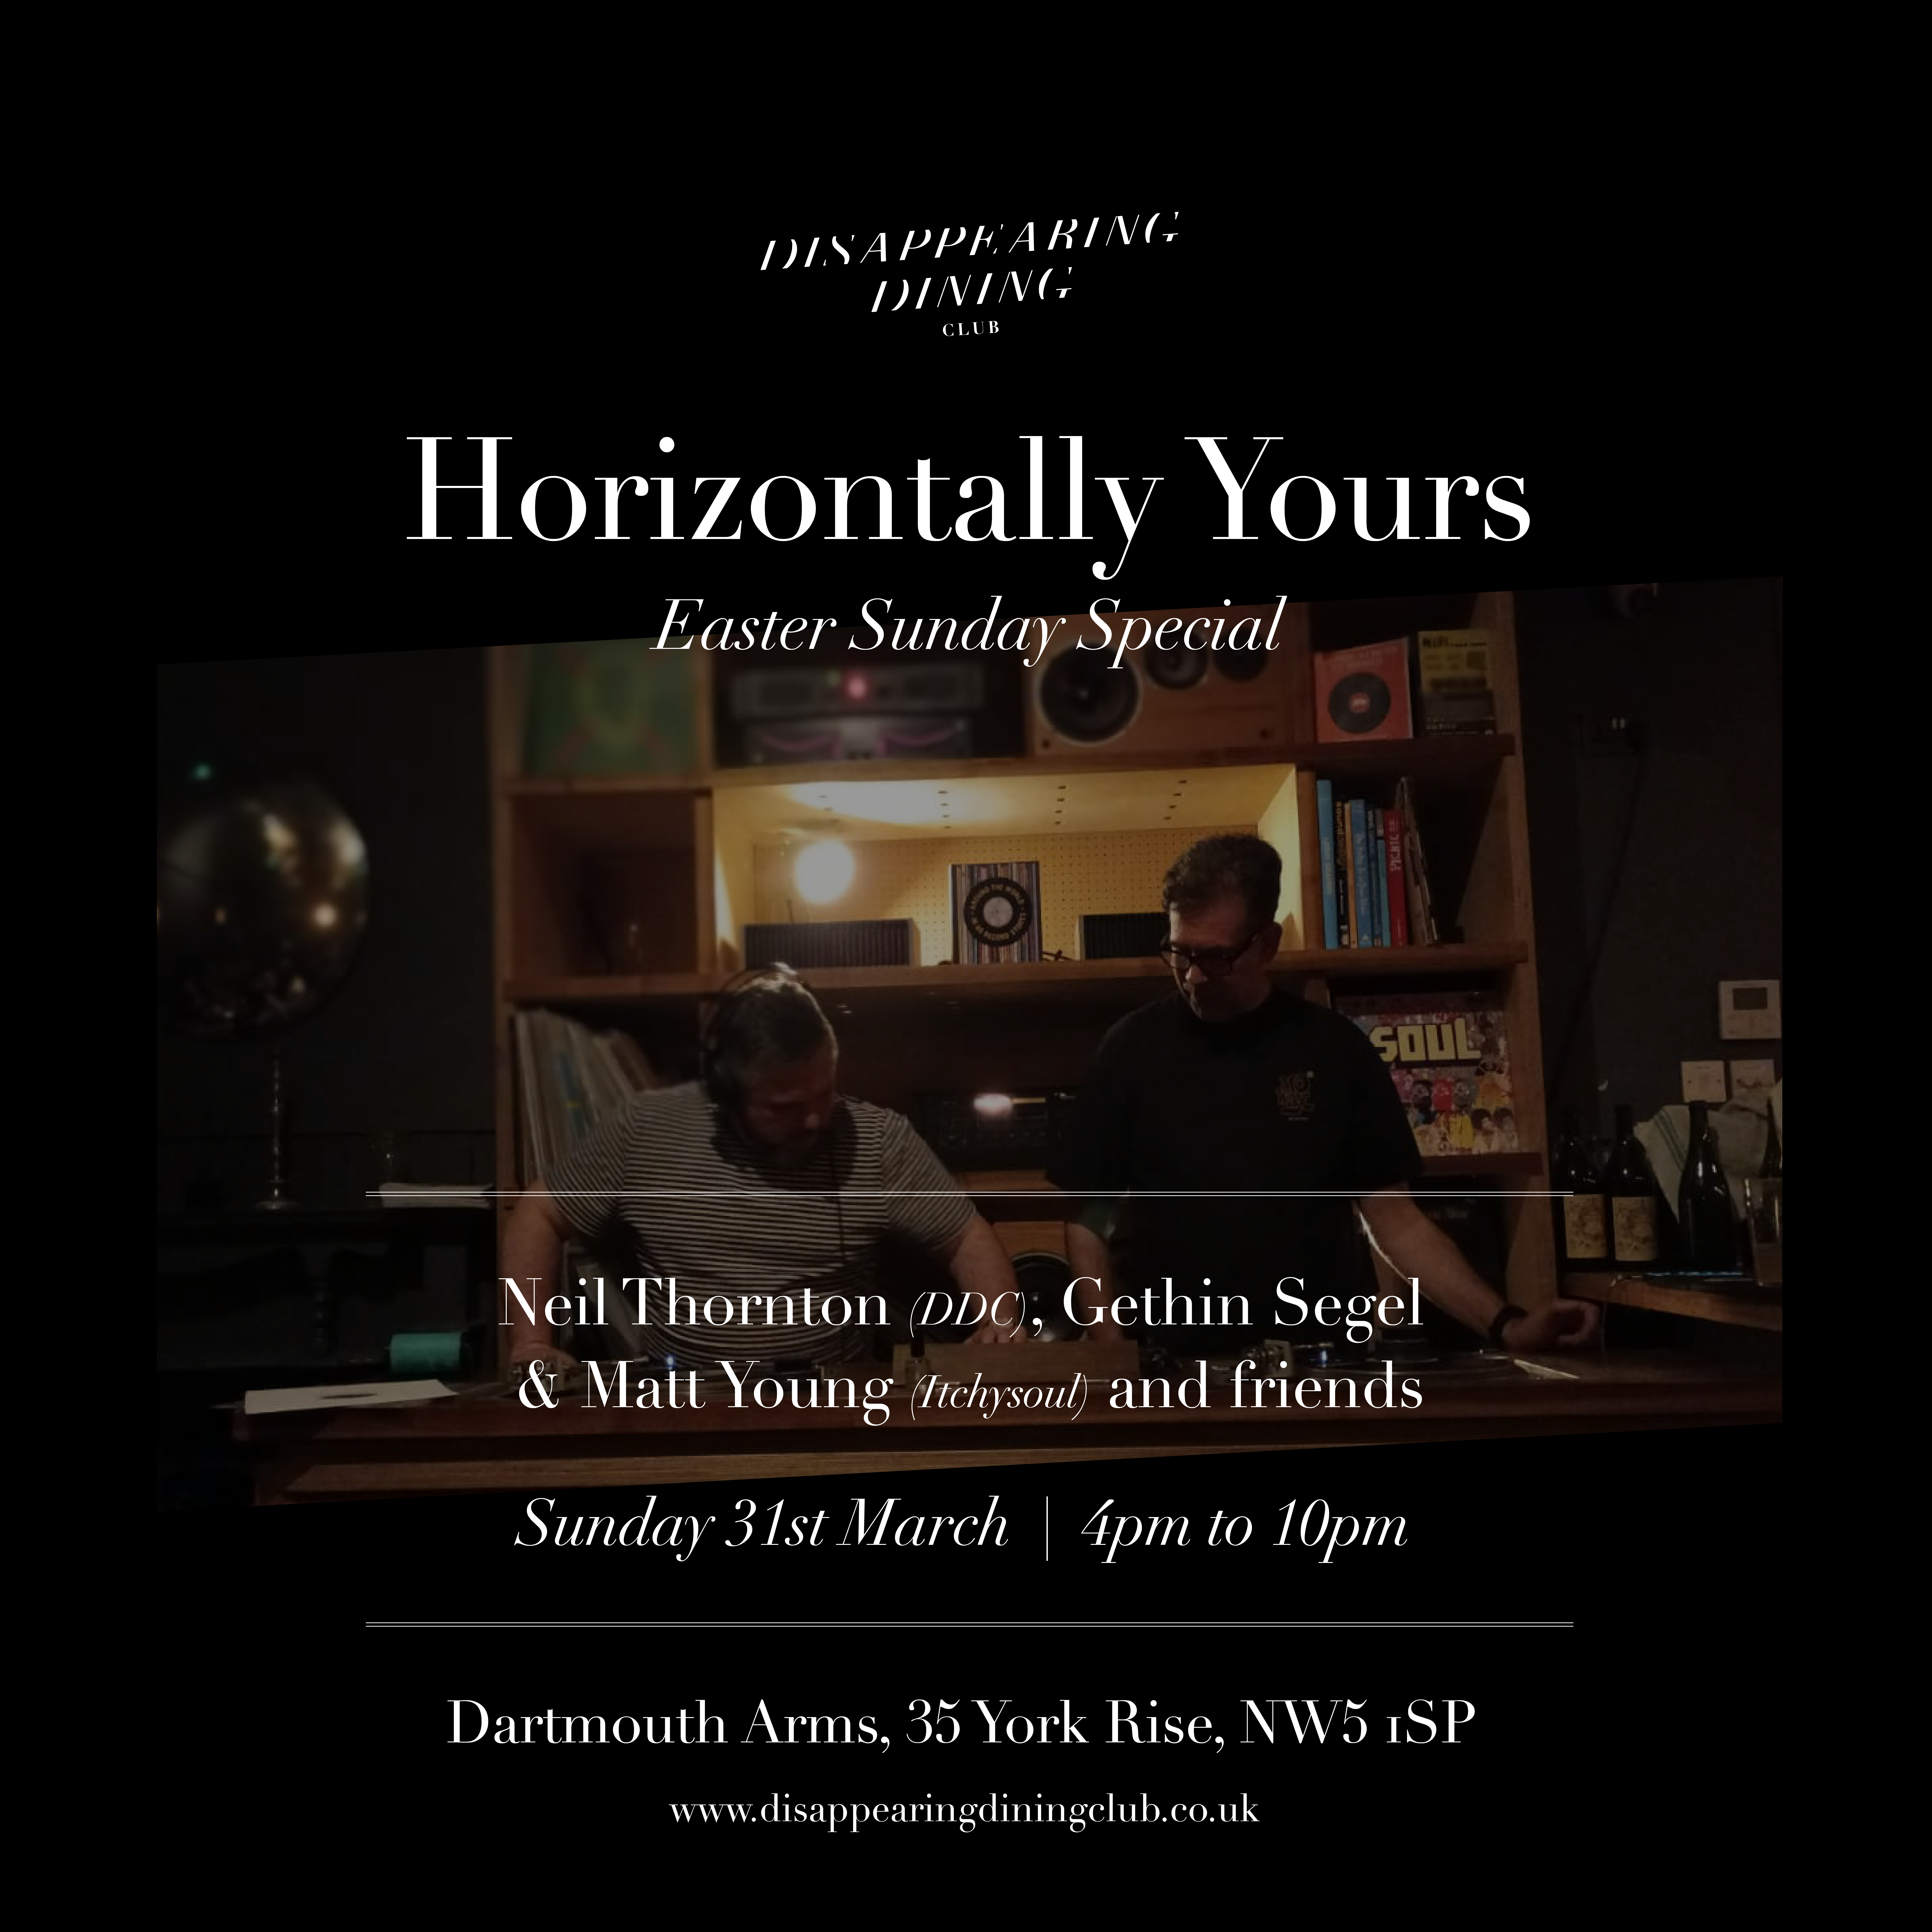 Horizontally Yours Easter Sunday special - フライヤー表